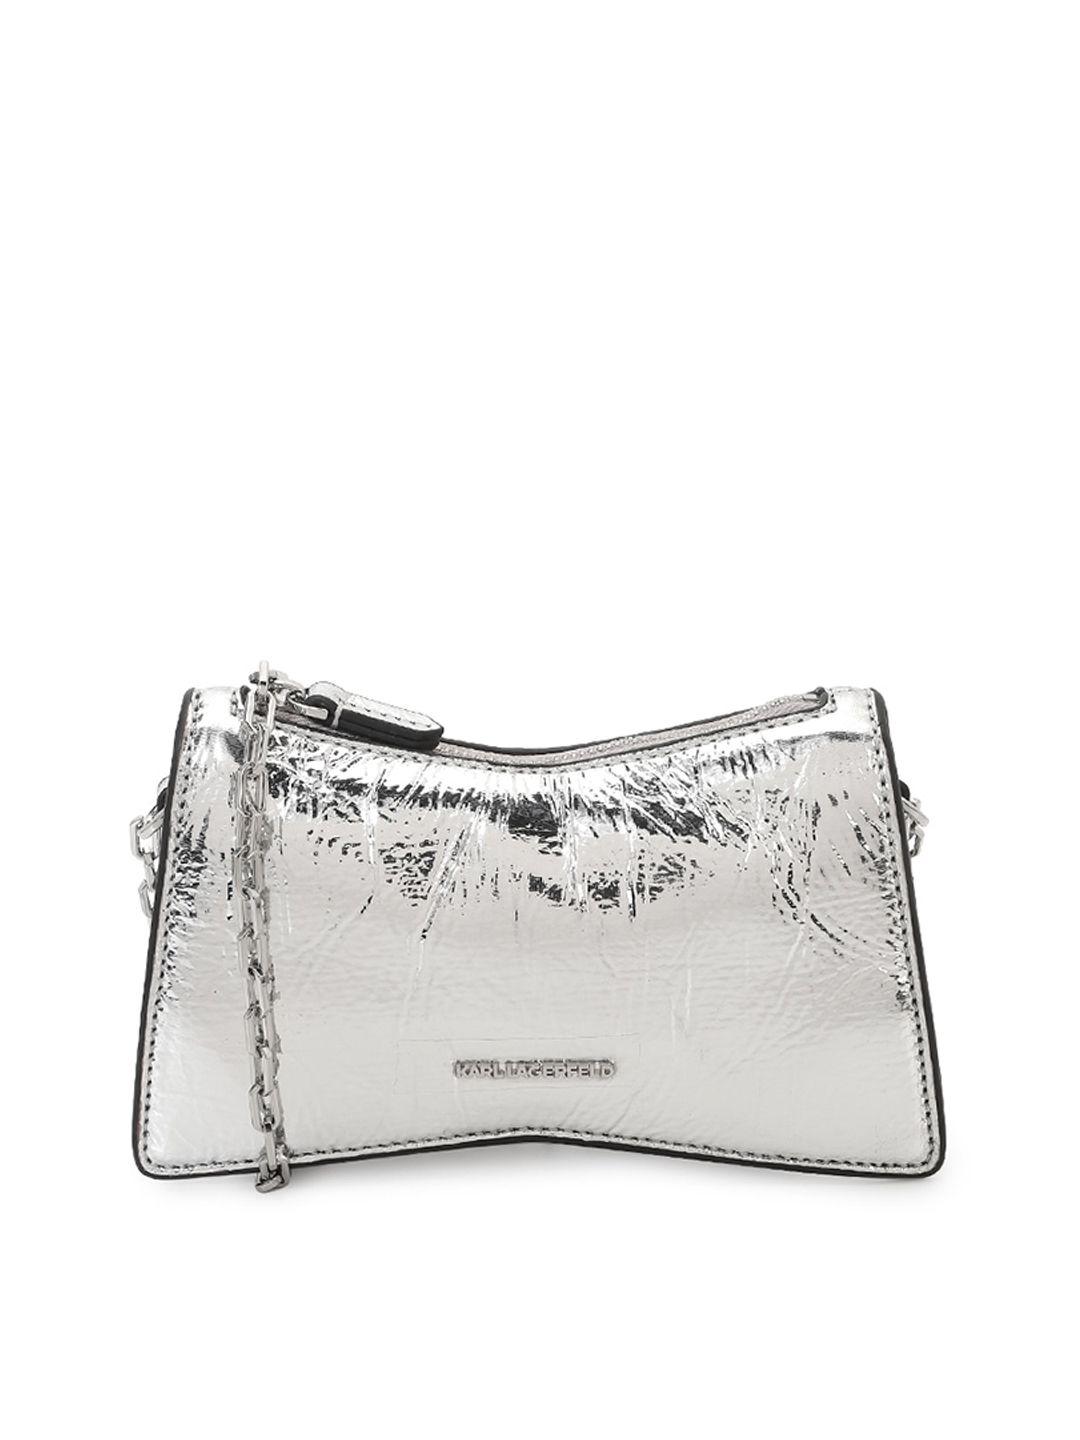 karl lagerfeld gunmetal-toned textured leather swagger sling bag